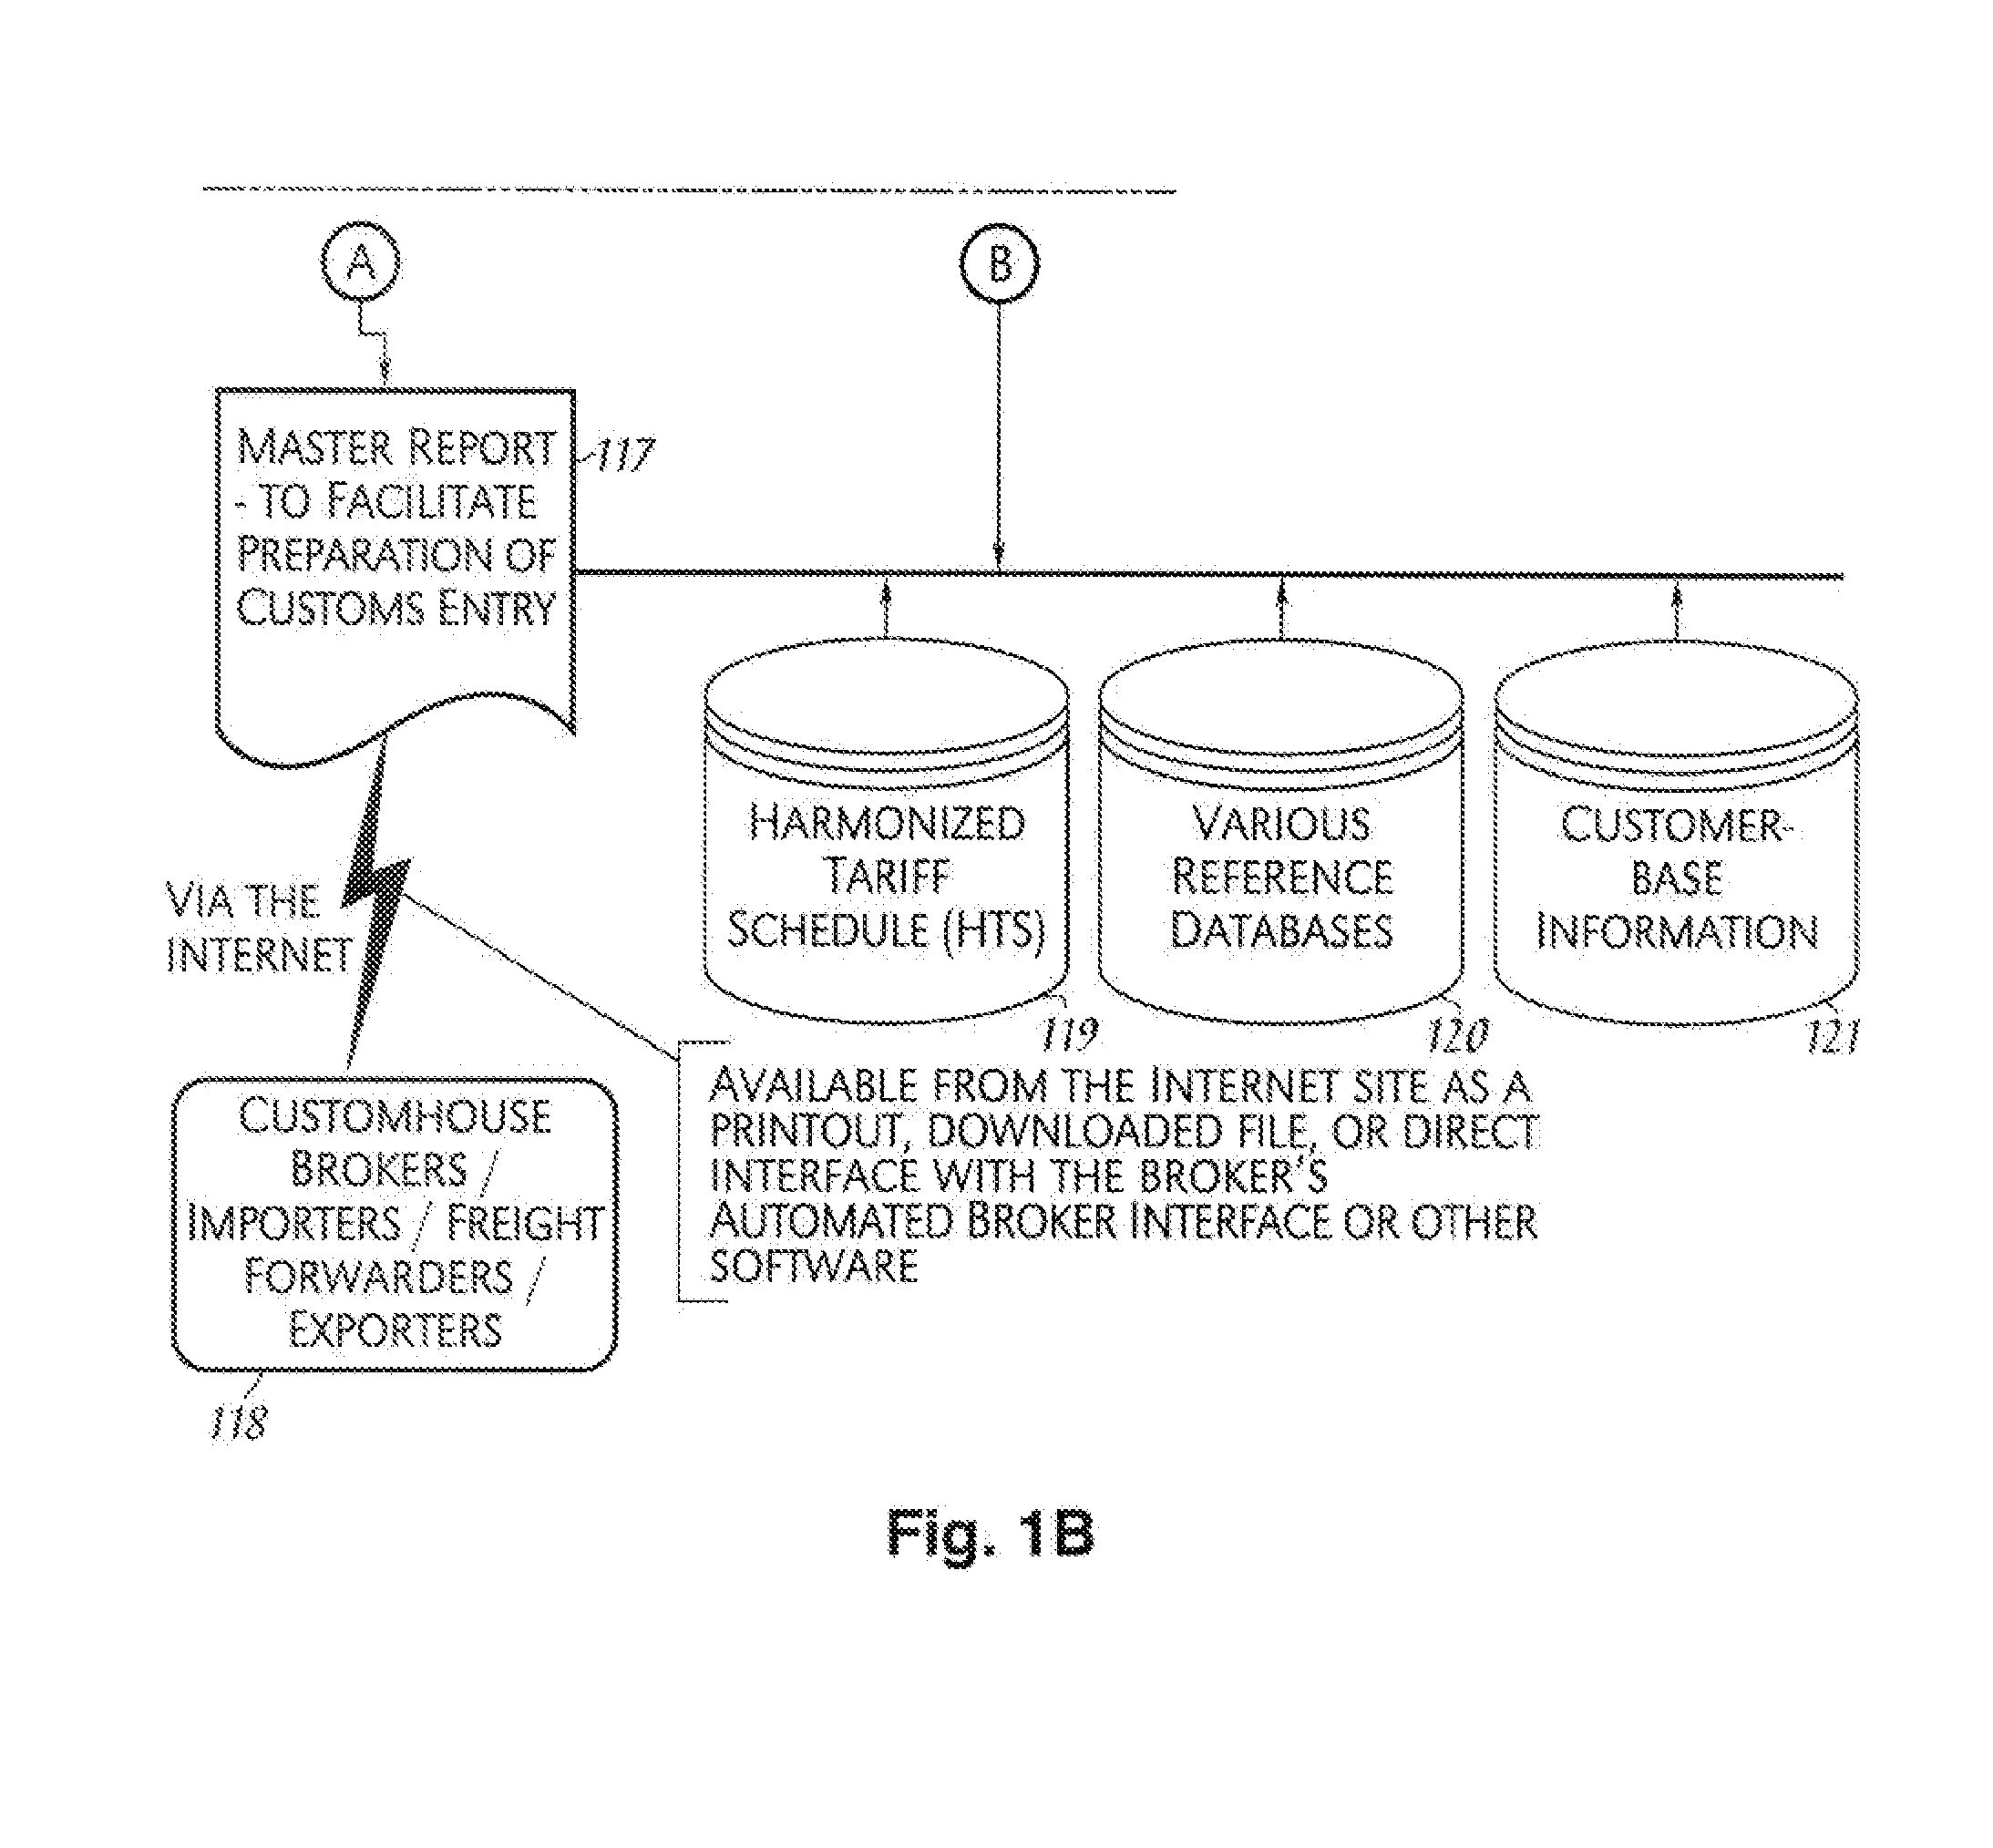 System and method for processing import/export transactions